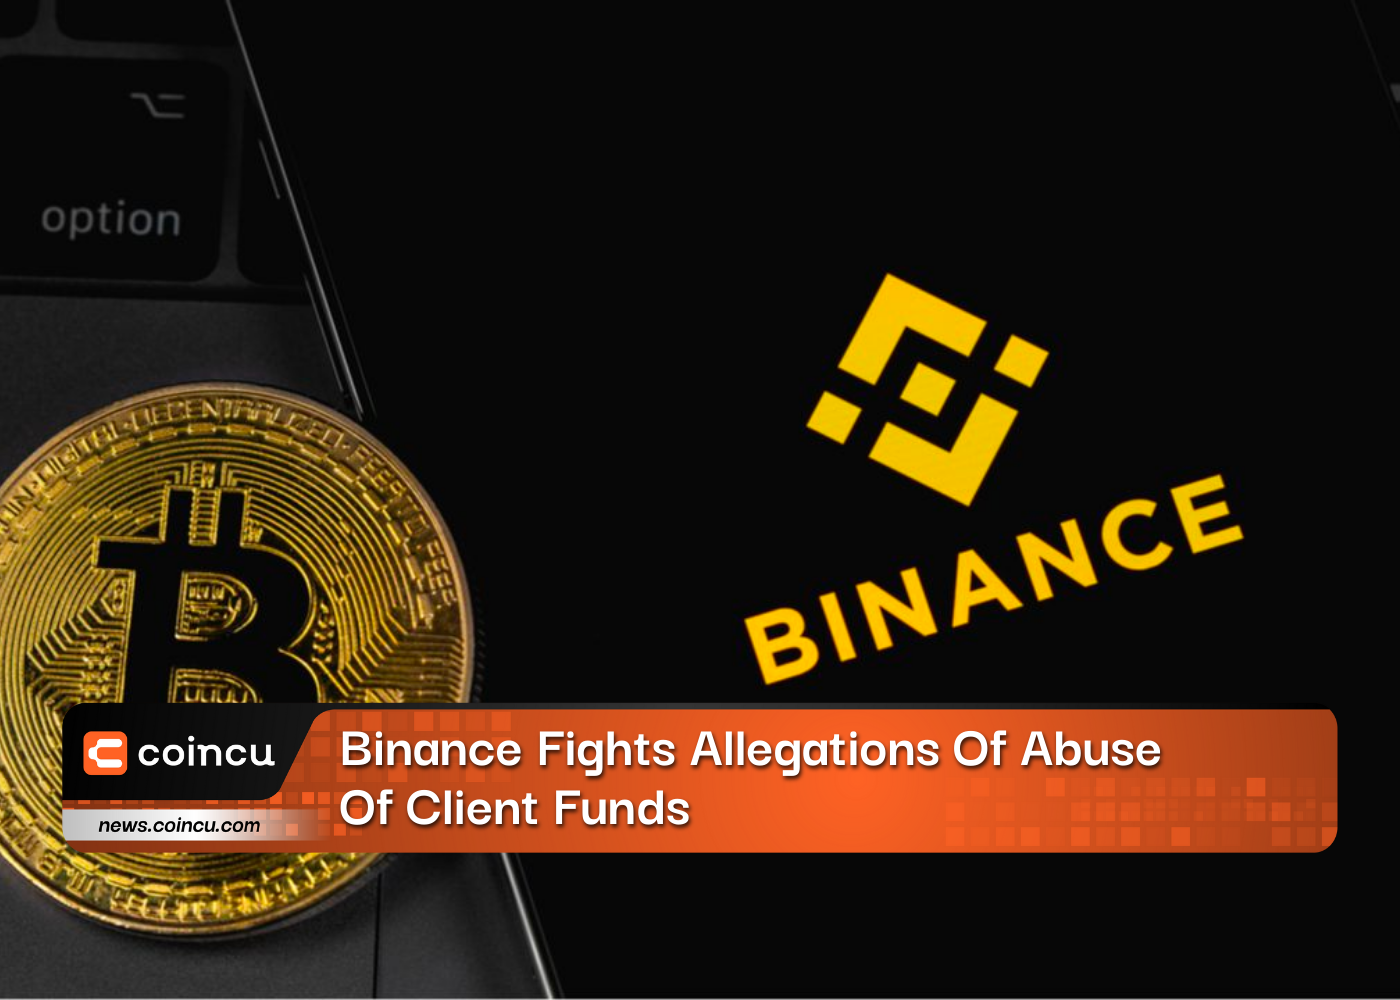 Binance Fights Allegations Of Abuse Of Client Funds